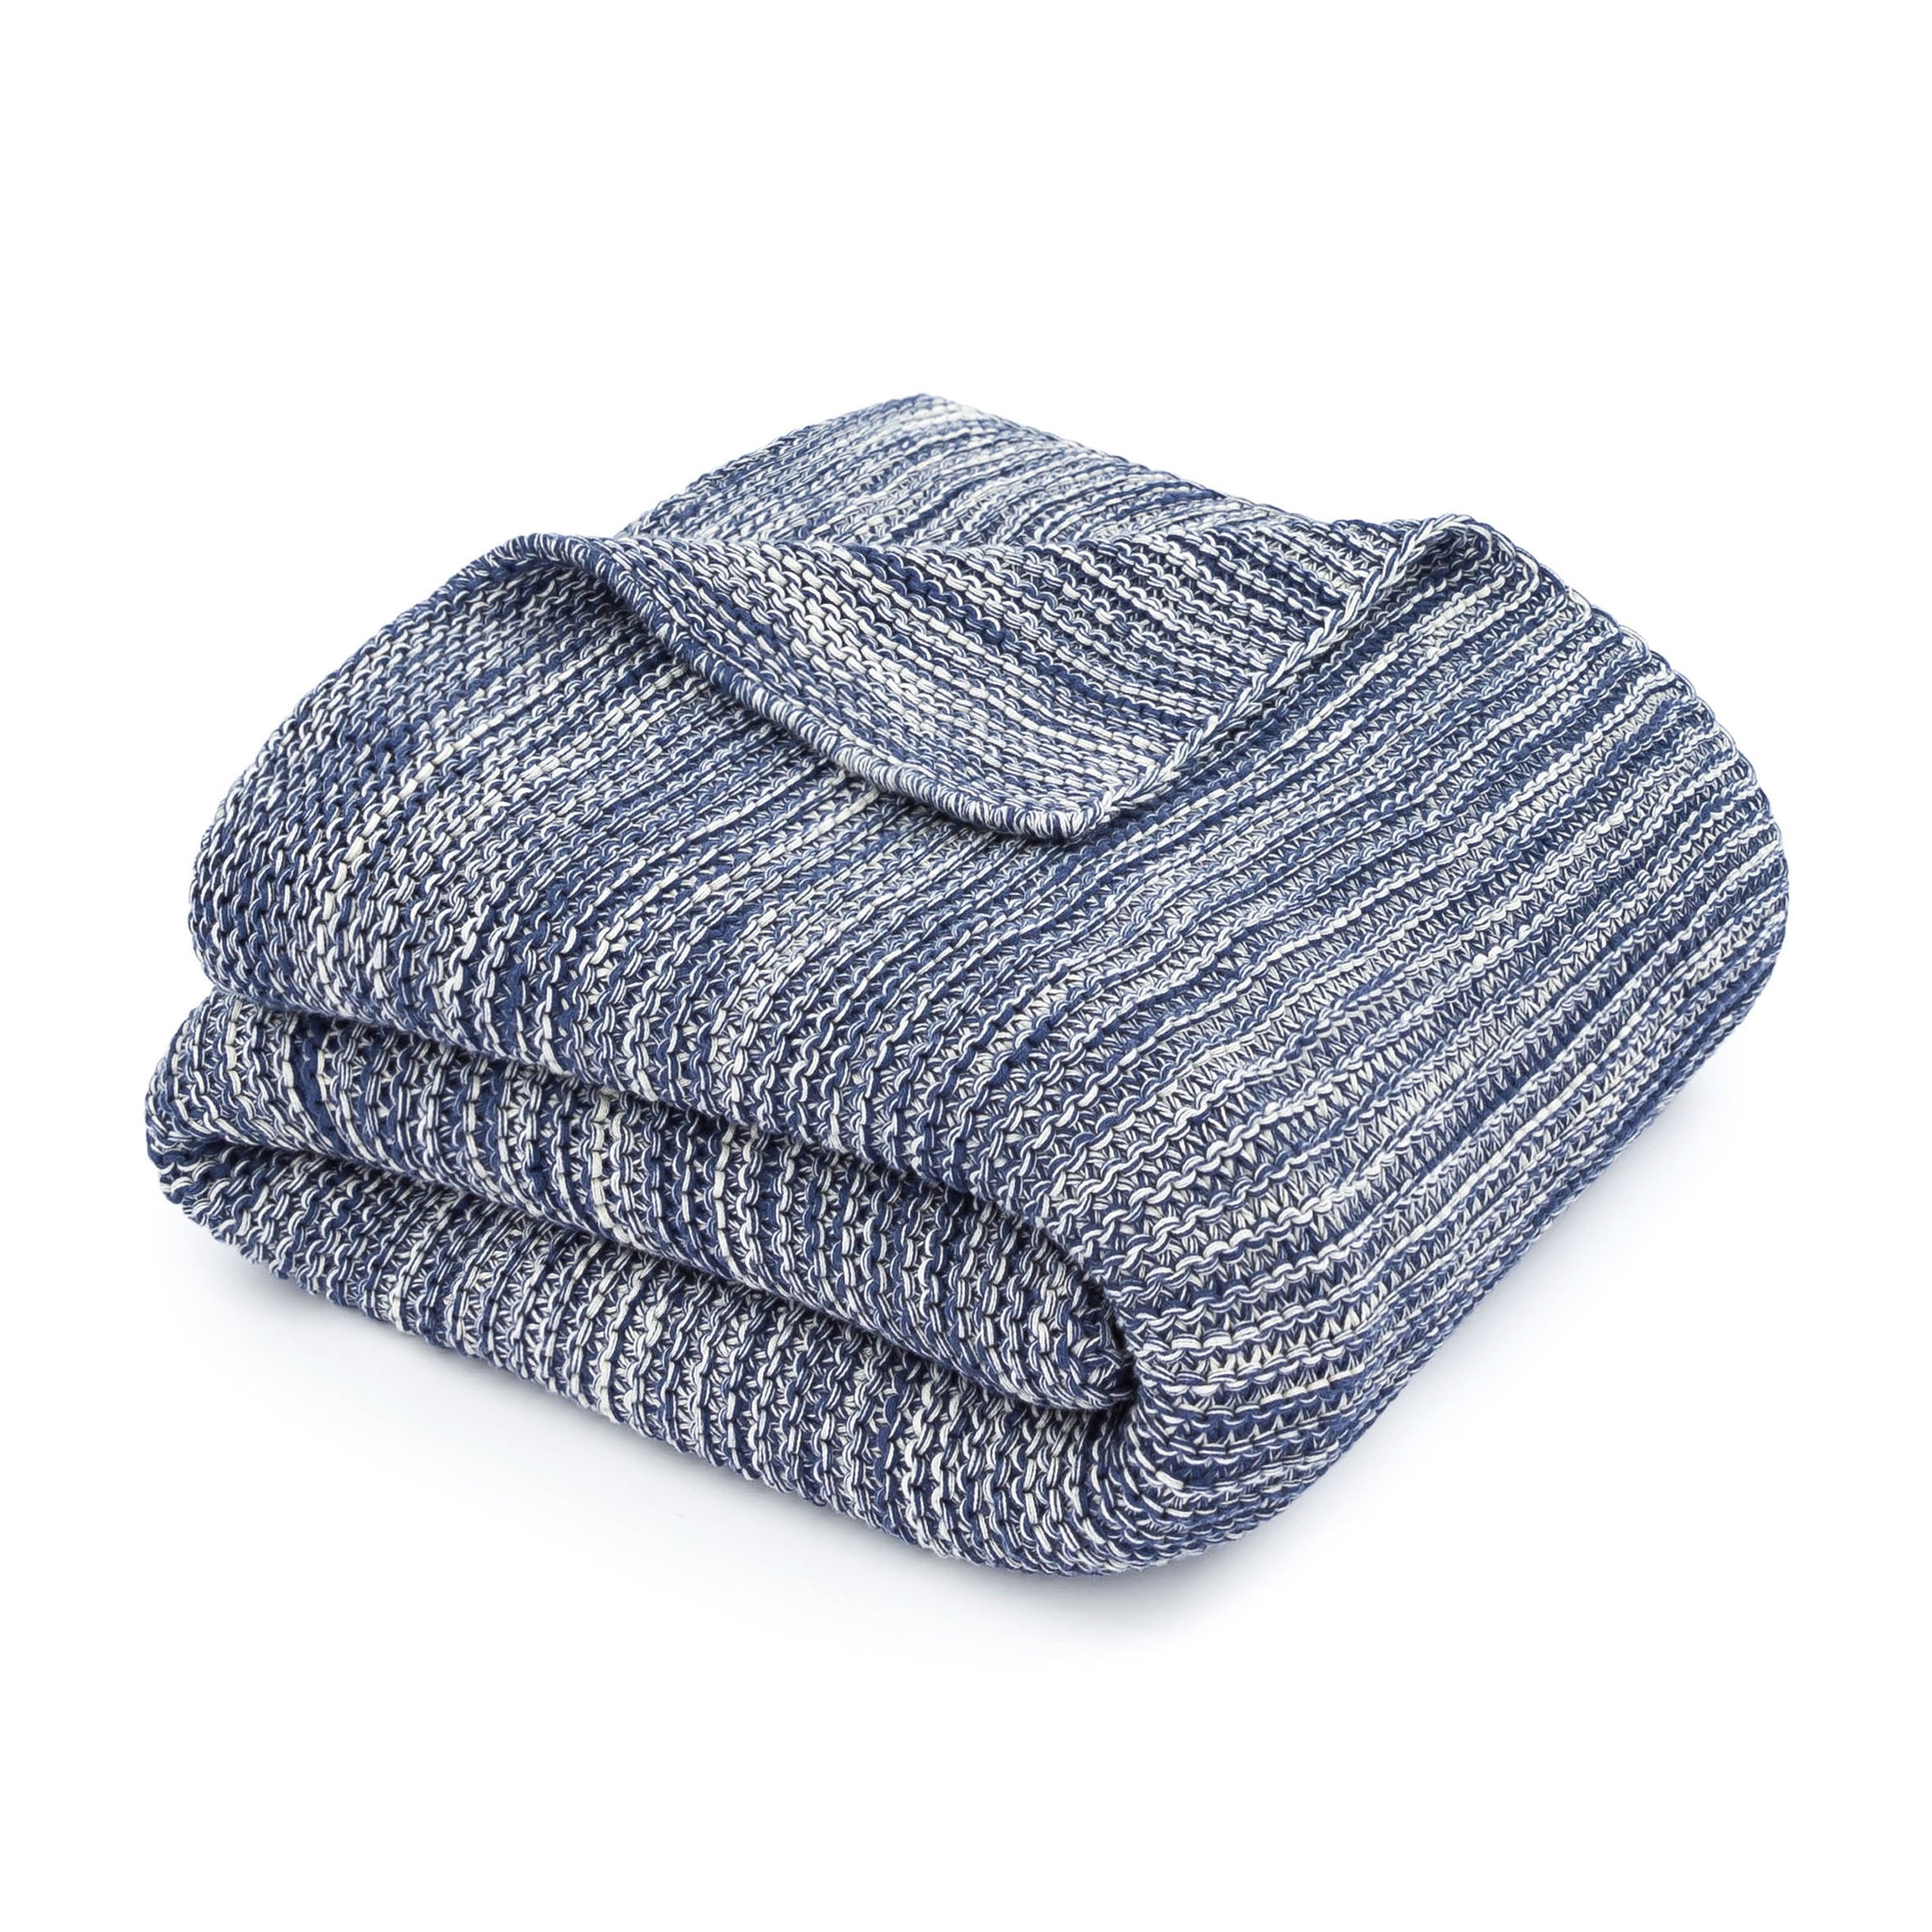 Saturday Park Navy Knitted Throw Blanket